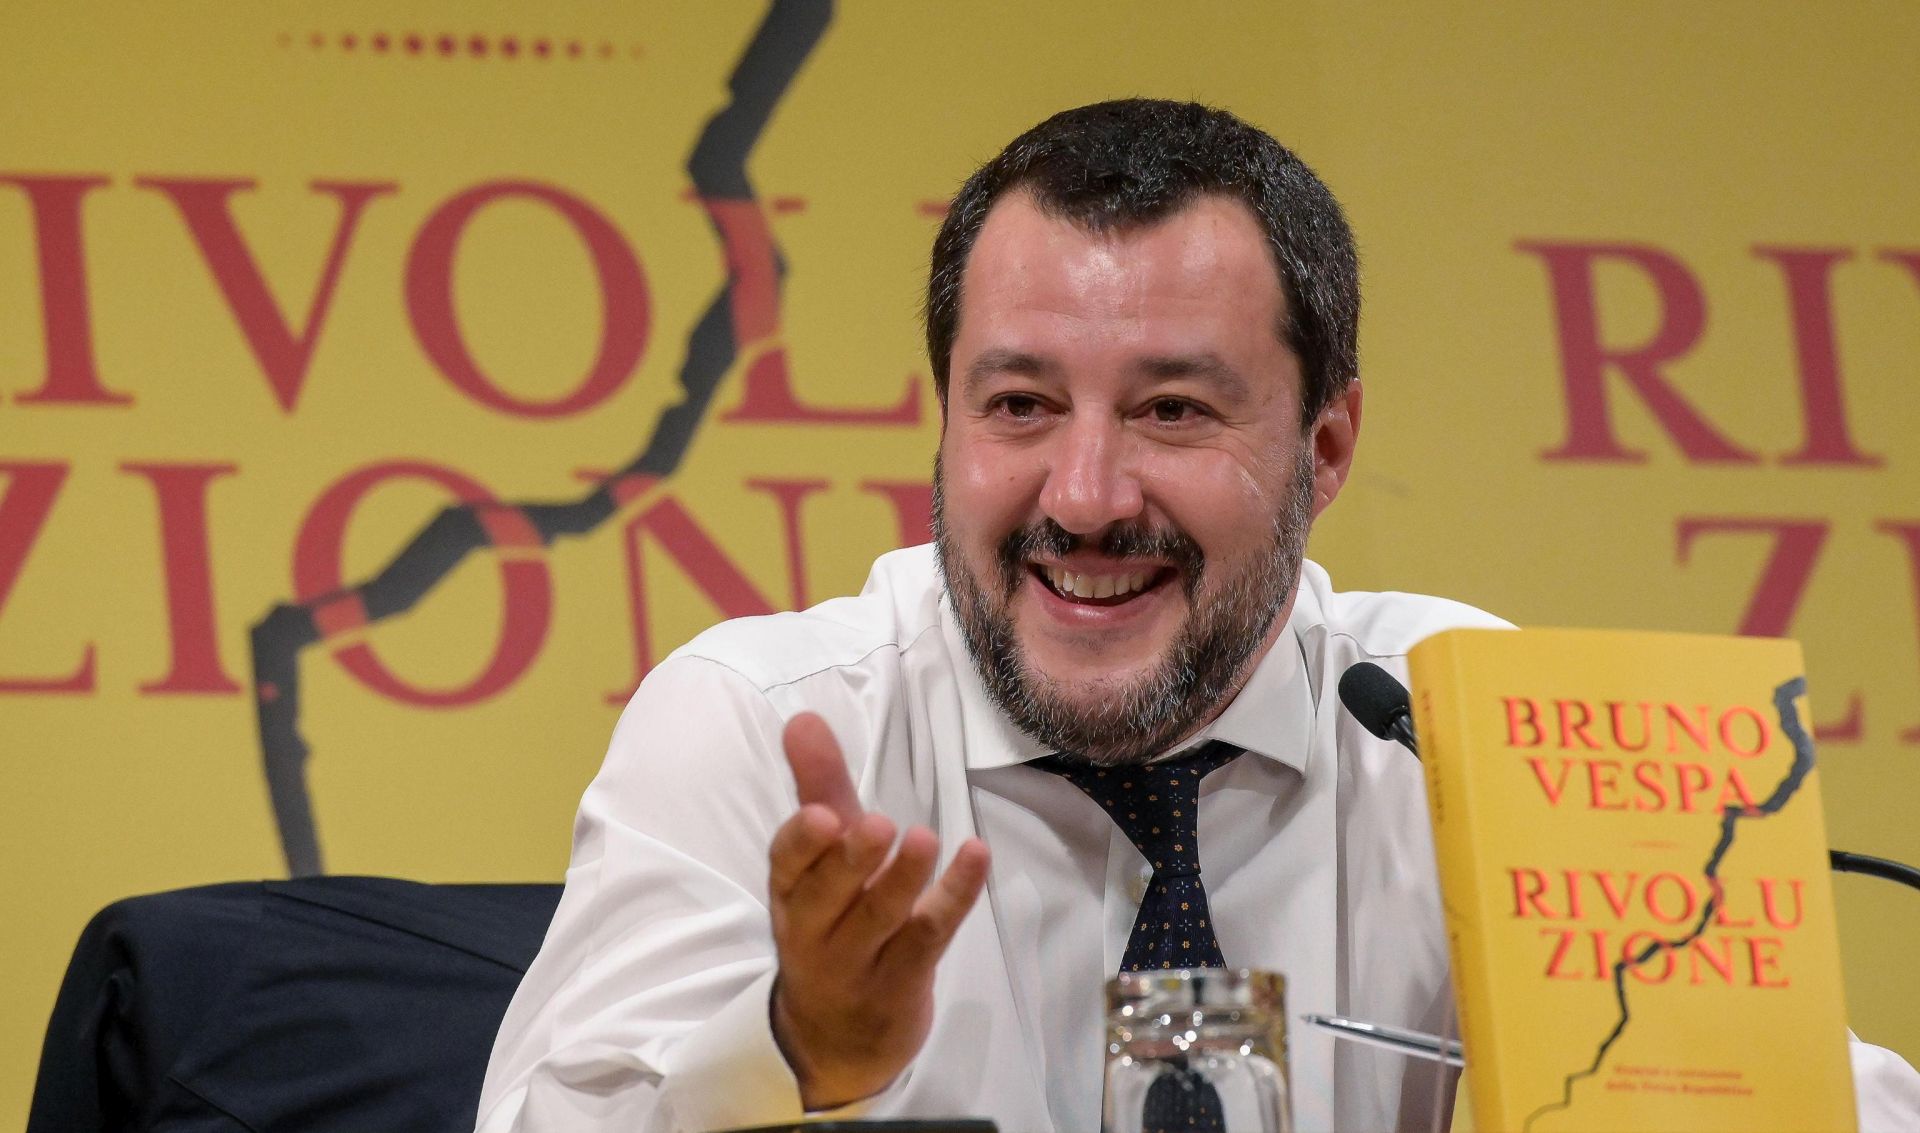 epa07208586 Italian Deputy Premier and Interior Minister, Matteo Salvini speaks during the presentation of the book by Italian journalist Bruno Vespa, tittled 'Revolution - Men and the background of the Third Republic', in Rome, Italy, 04 december 2018.  EPA/ALESSANDRO DI MEO